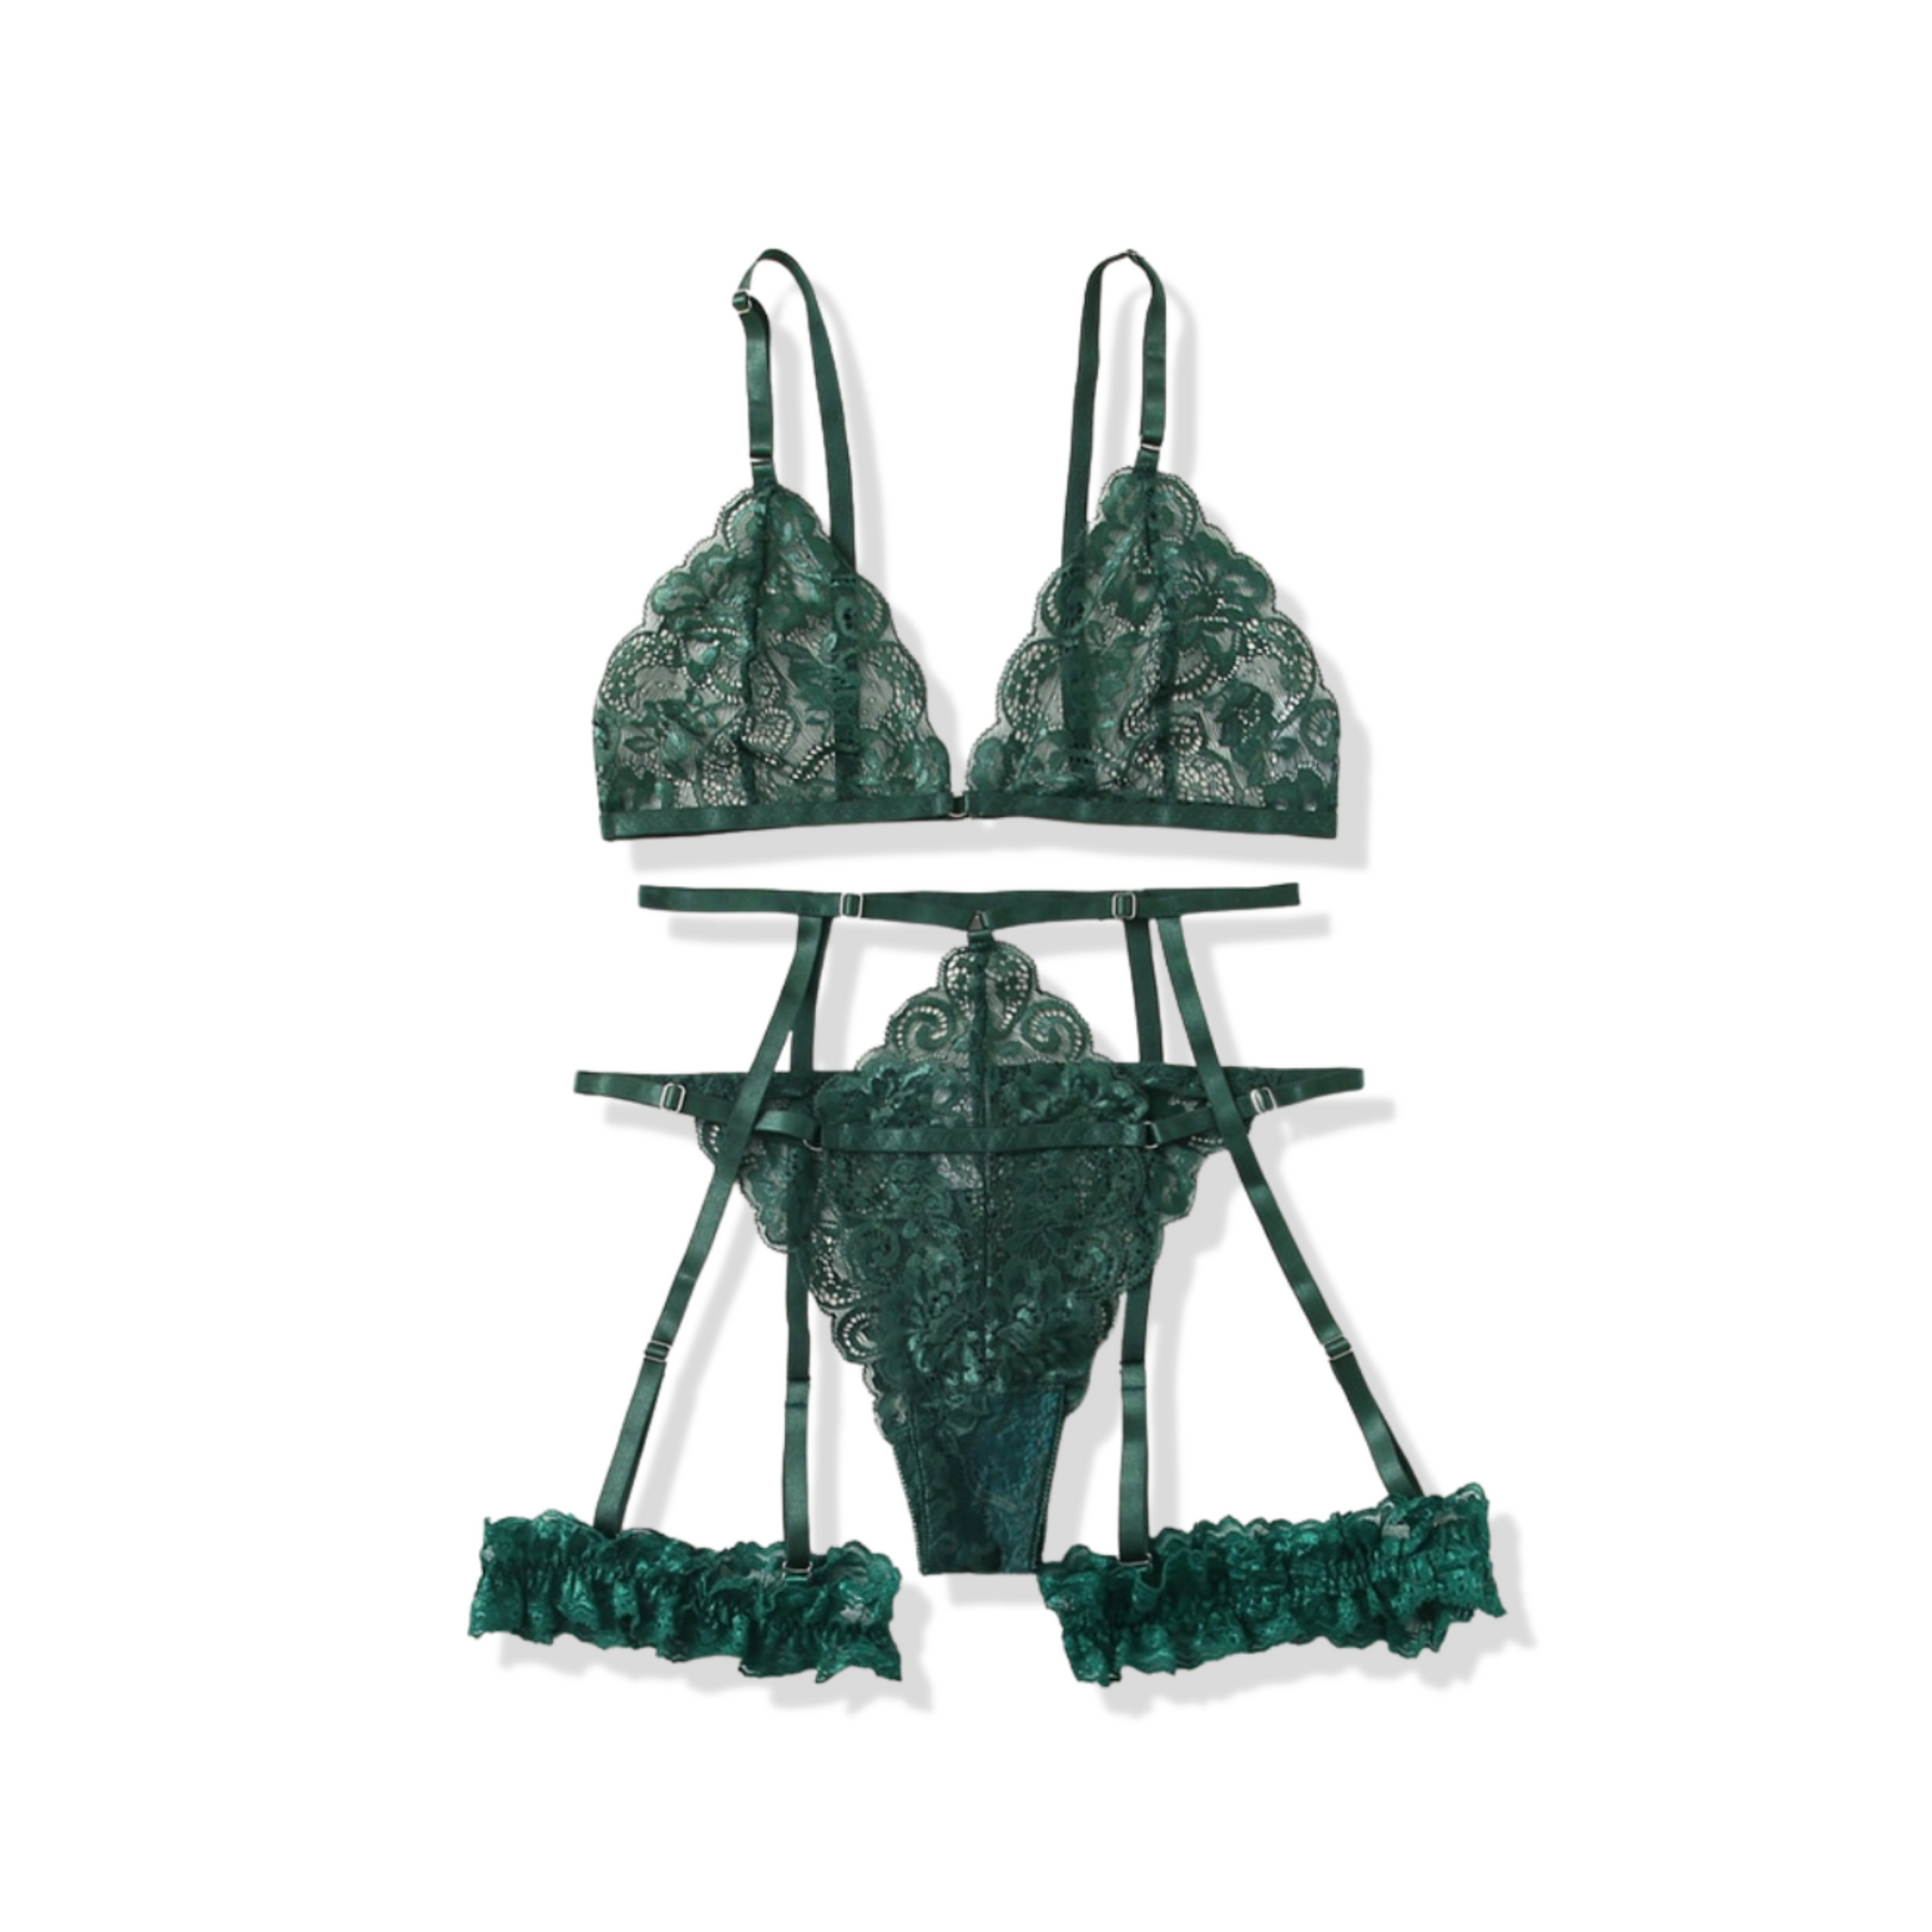 Emerald Dark Green Lace Satin Lingerie Set, Underwired Bra and Brazilian,  Luxury Lingerie, New Handmade Aesthetic Retrouvaille Lingerie -  Canada